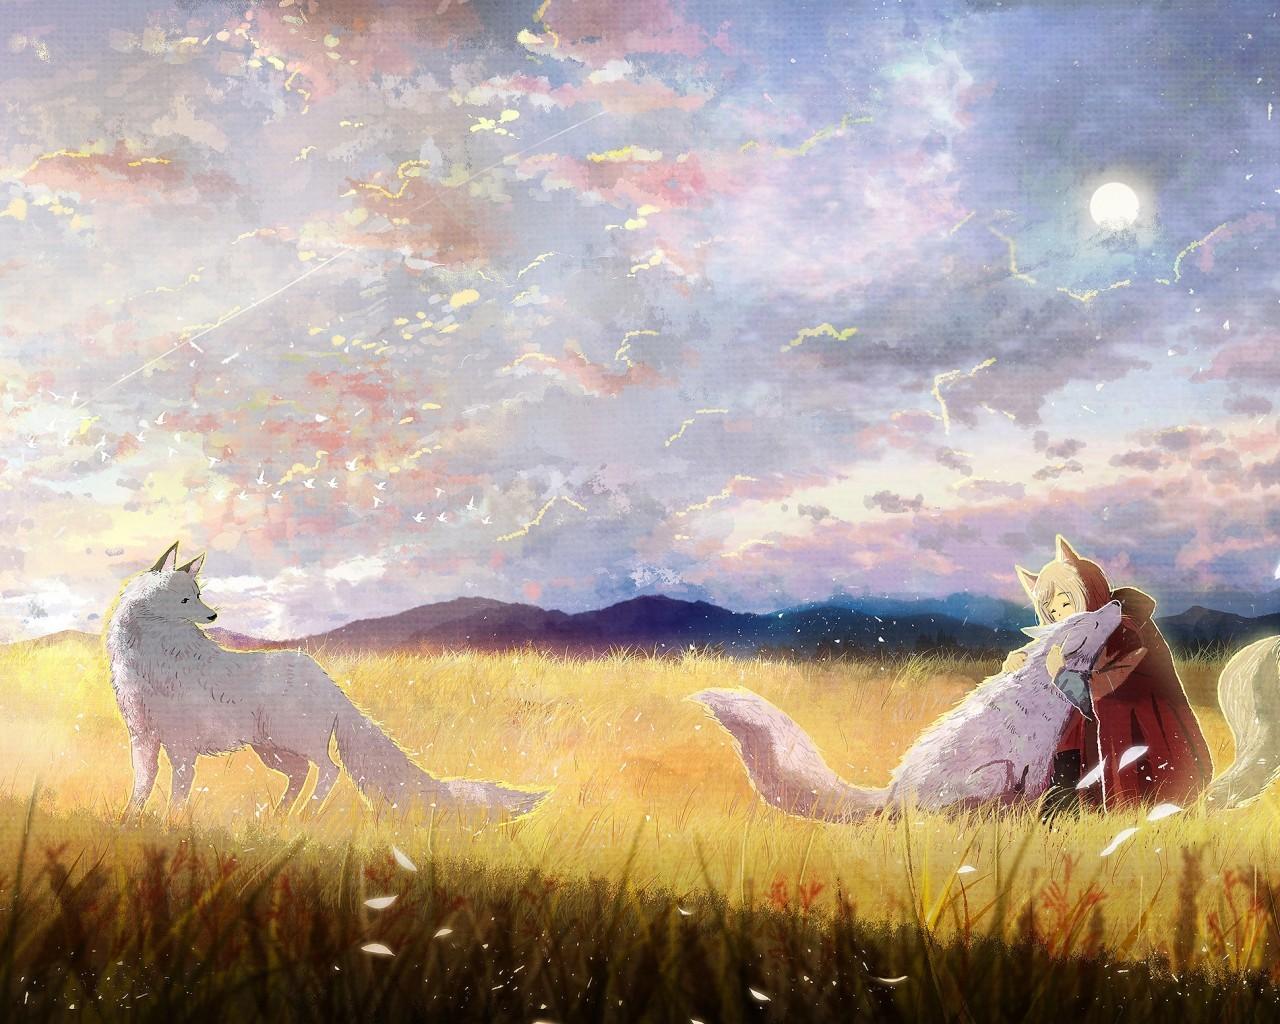 Download 1280x1024 Anime Wolf Girl, White Wolves, Field